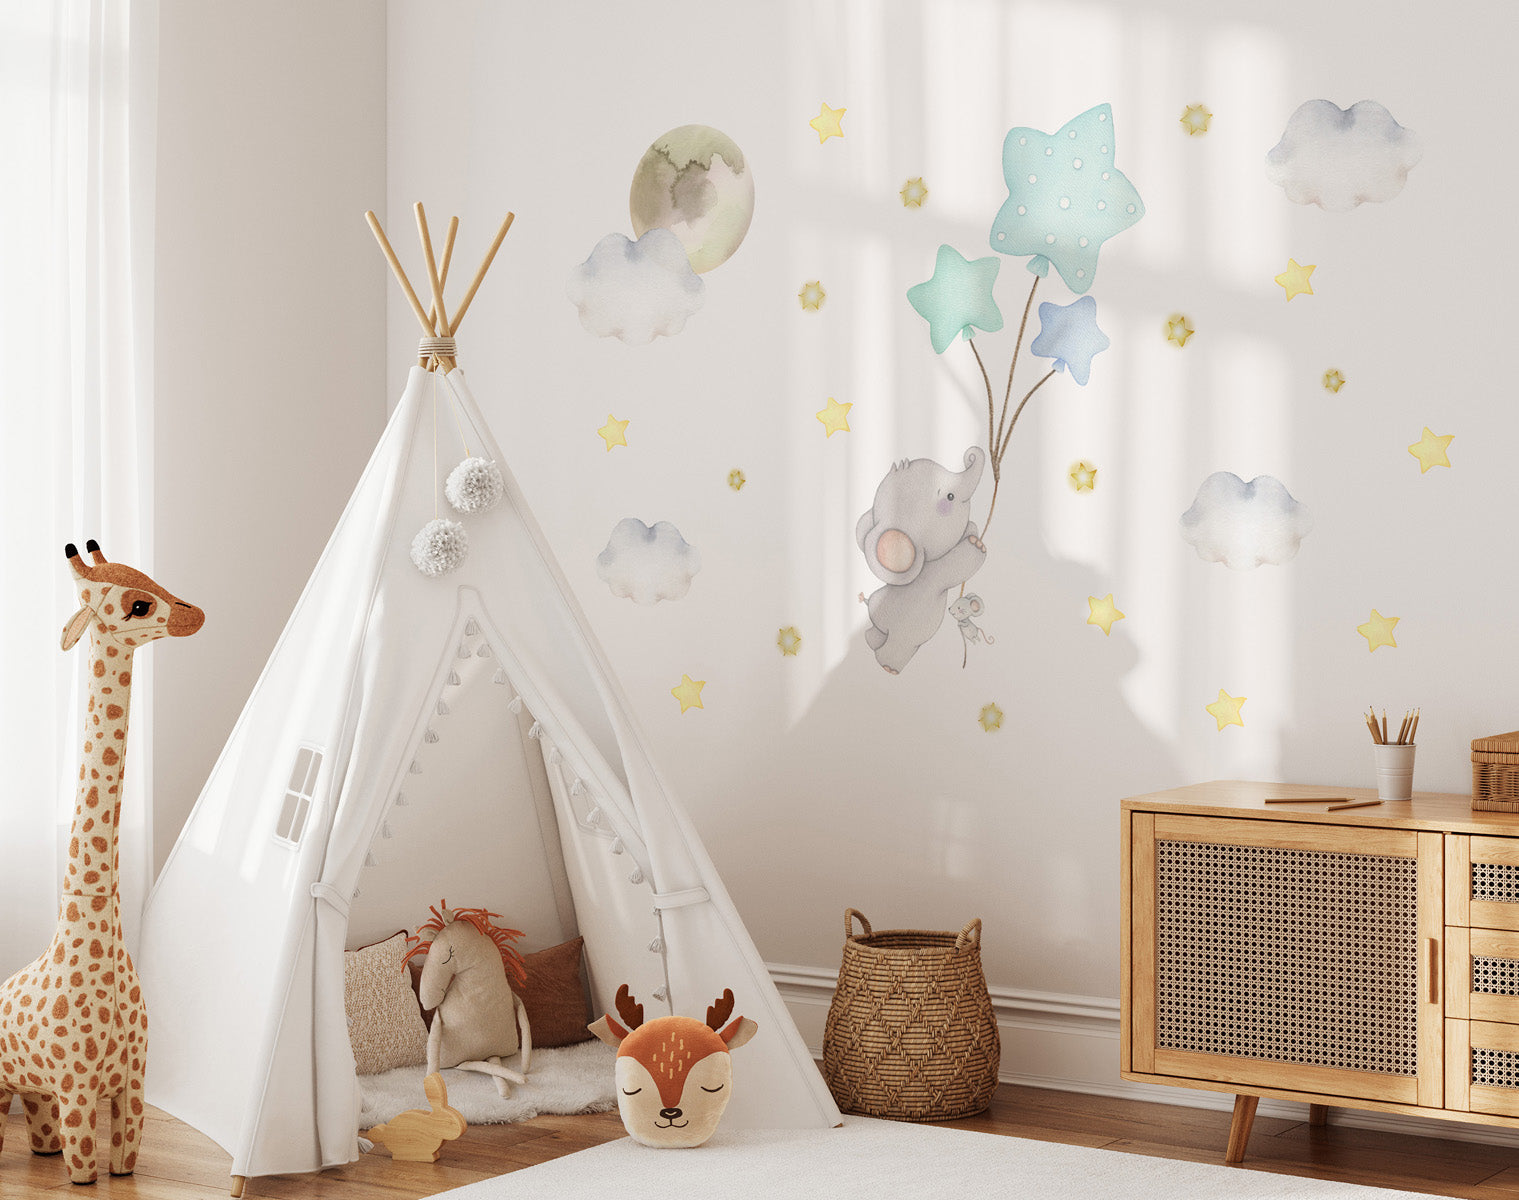 Elephant with balloons. Clouds. Boy's room big wall stickers. Golden stars.